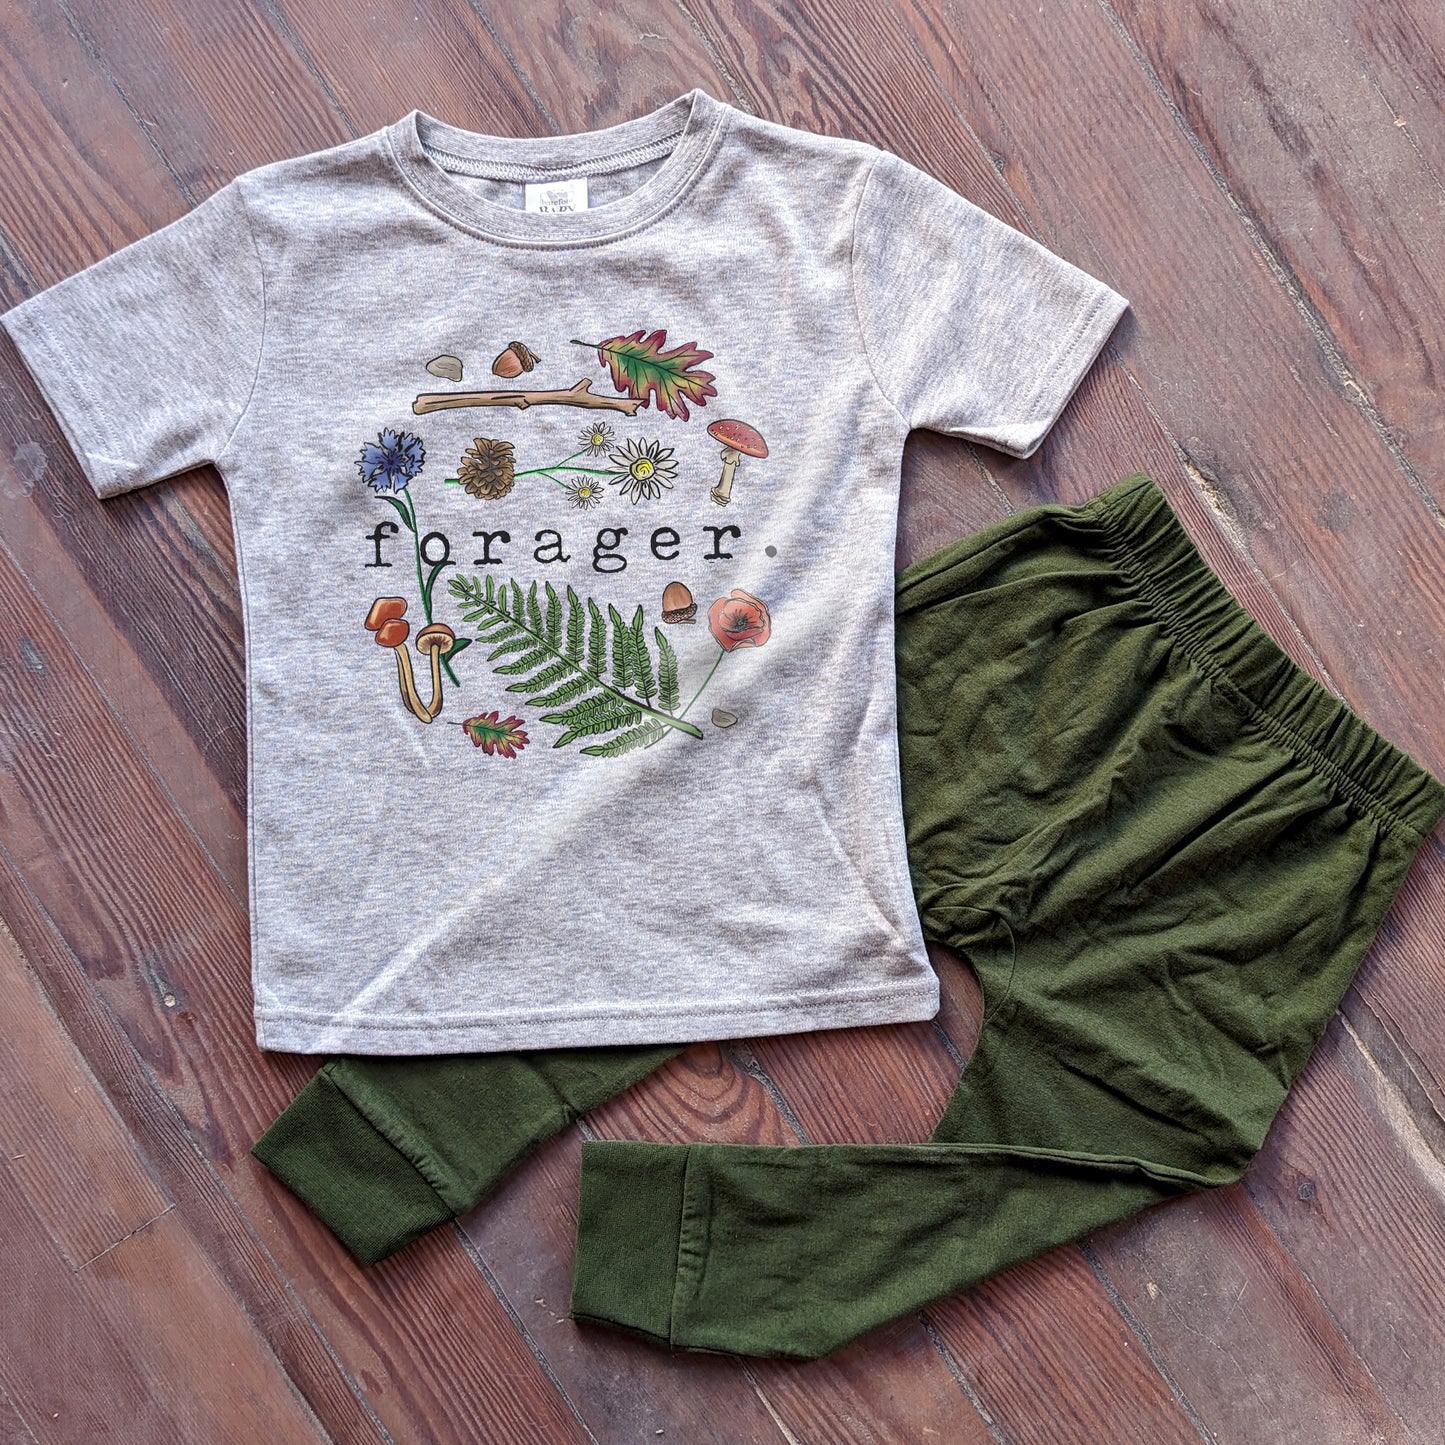 "Forager" Grey & Green Sleep 'n Play Set | Size 2T through 5T | Includes Shirt & Joggers